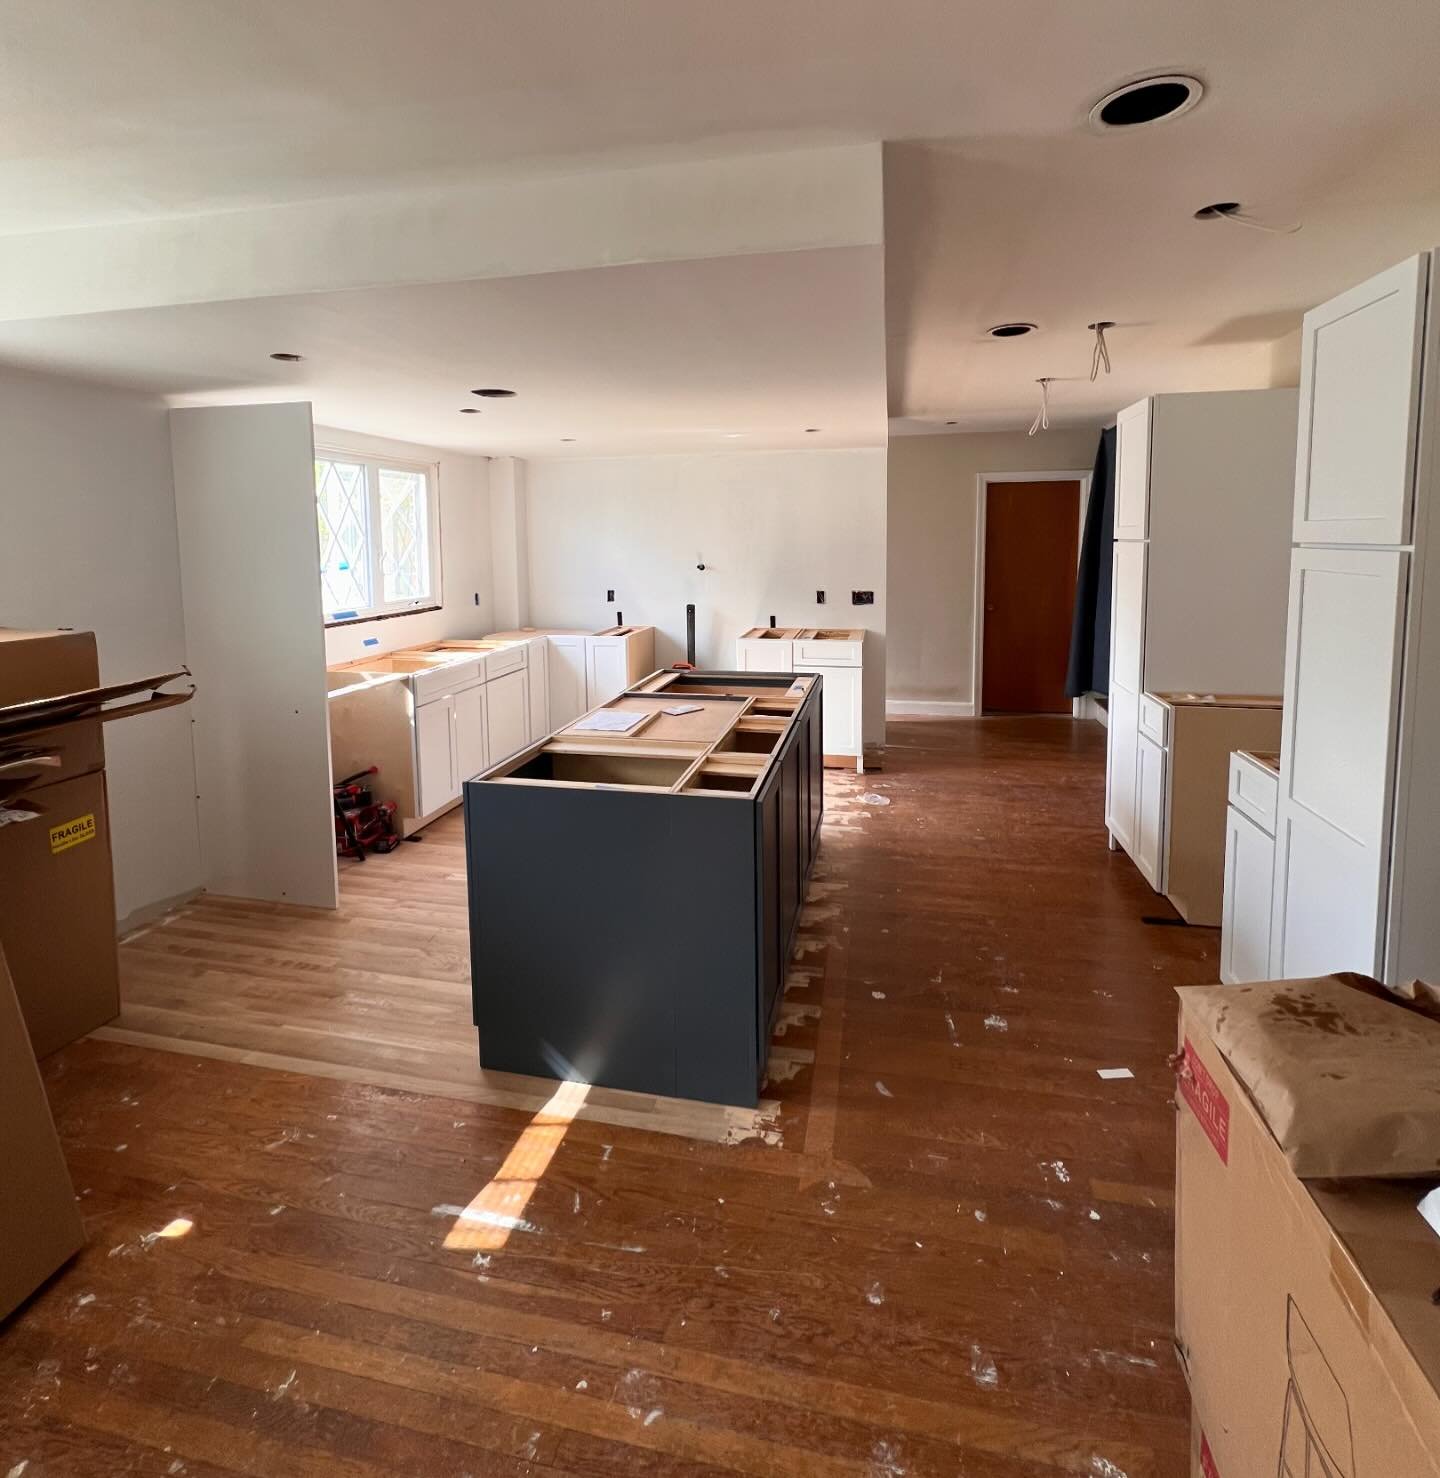 Progress on our ongoing kitchen renovation in Canton - lowers installed and templated to get countertops fabricated and installed as efficiently as possible!